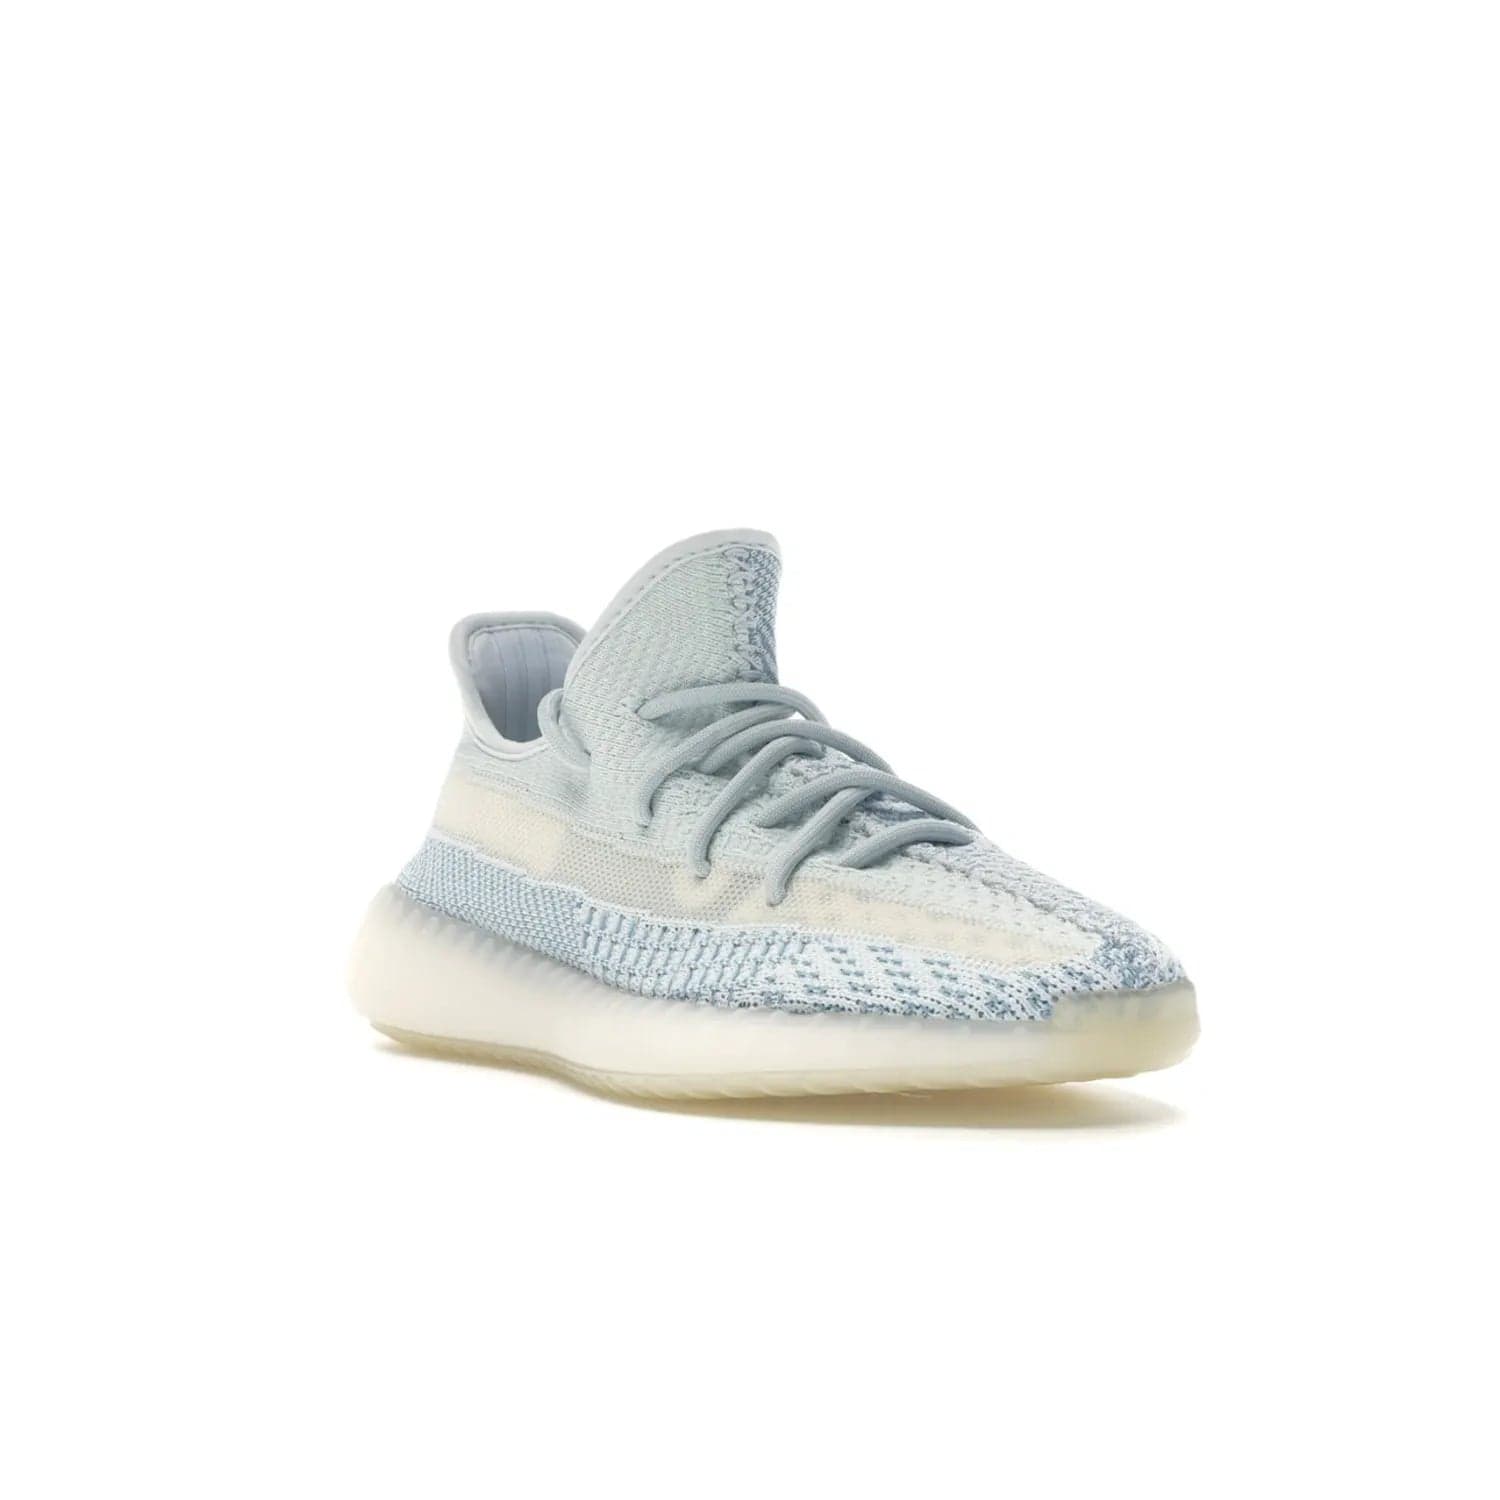 adidas Yeezy Boost 350 V2 Cloud White (Non-Reflective) - Image 6 - Only at www.BallersClubKickz.com - Adidas Yeezy Boost 350 V2 Cloud White (Non-Reflective) features Primeknit fabric and a unique, eye-catching design of cream, bluish-white, and transparent strip. Step out in timeless style with this eye-catching sneaker.